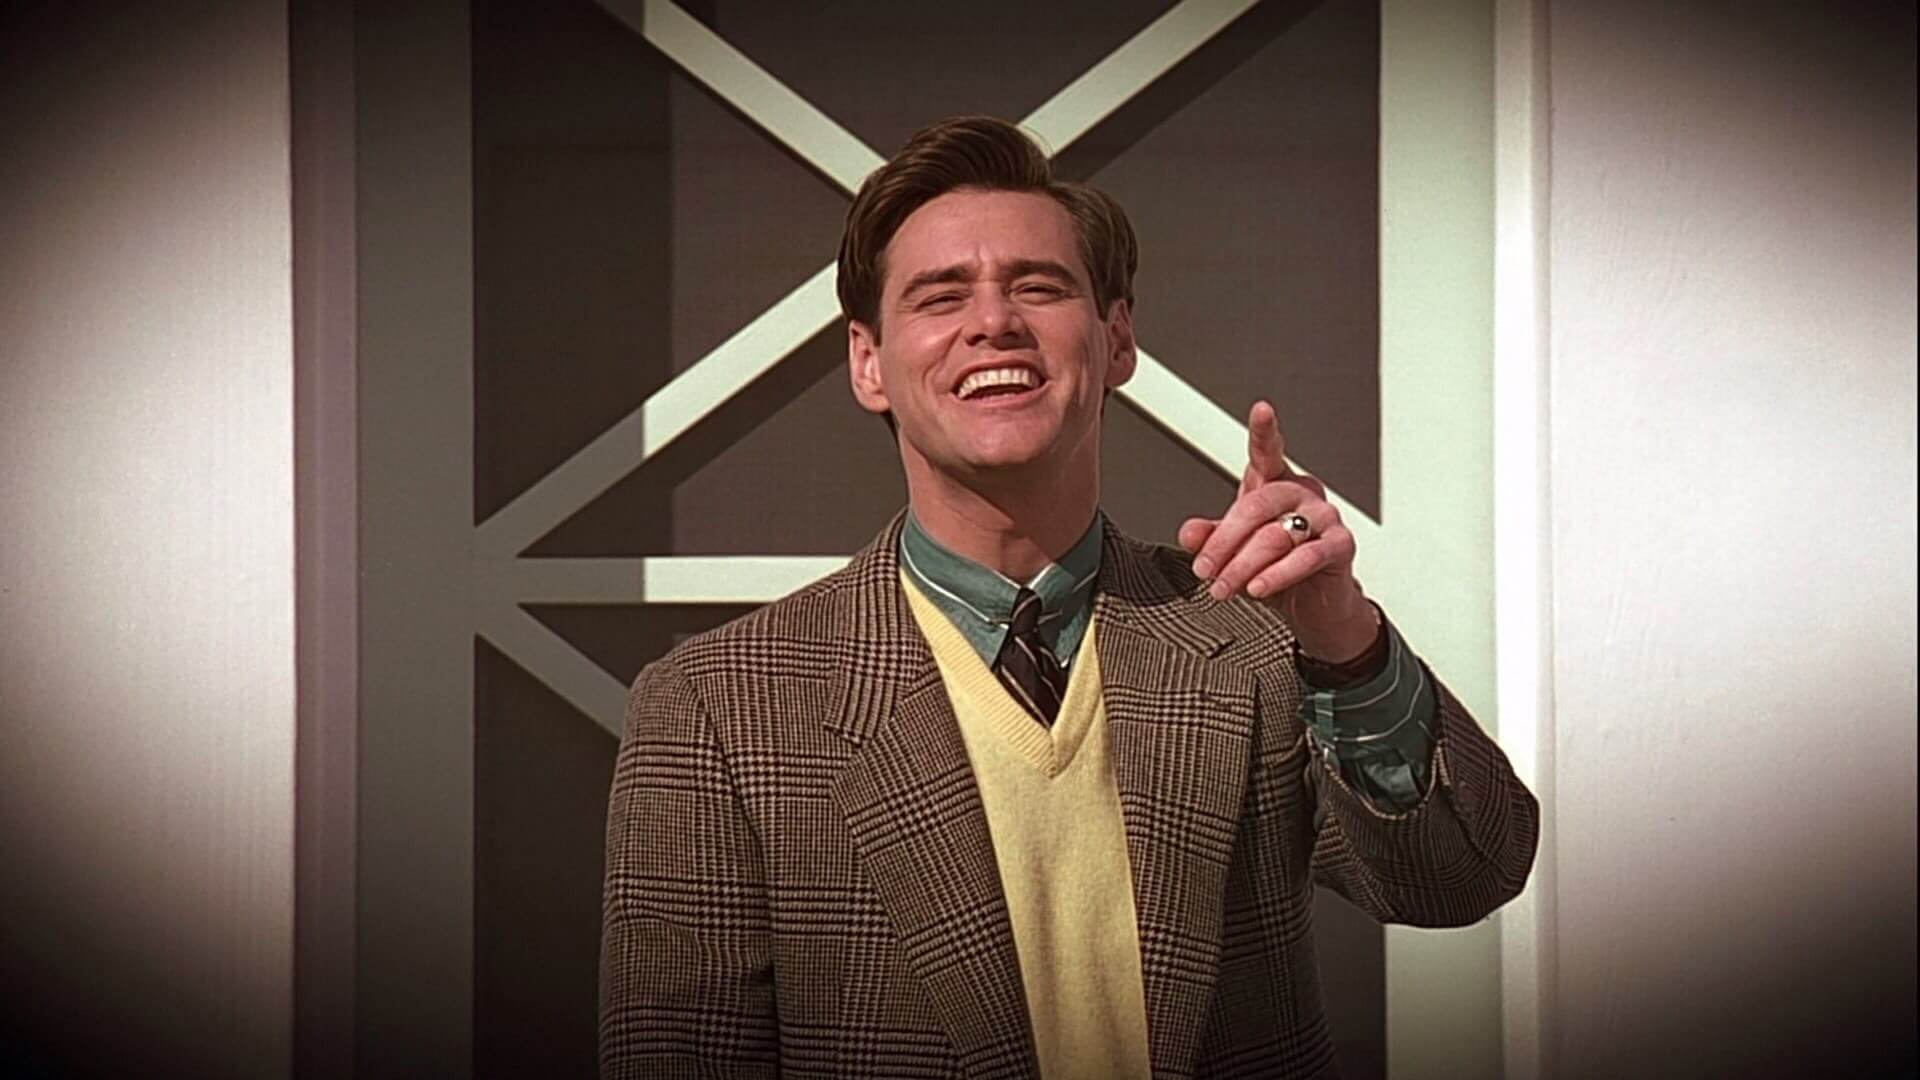 What Are the Stages of Dramatic Irony - The Truman Show - Featured - StudioBinder